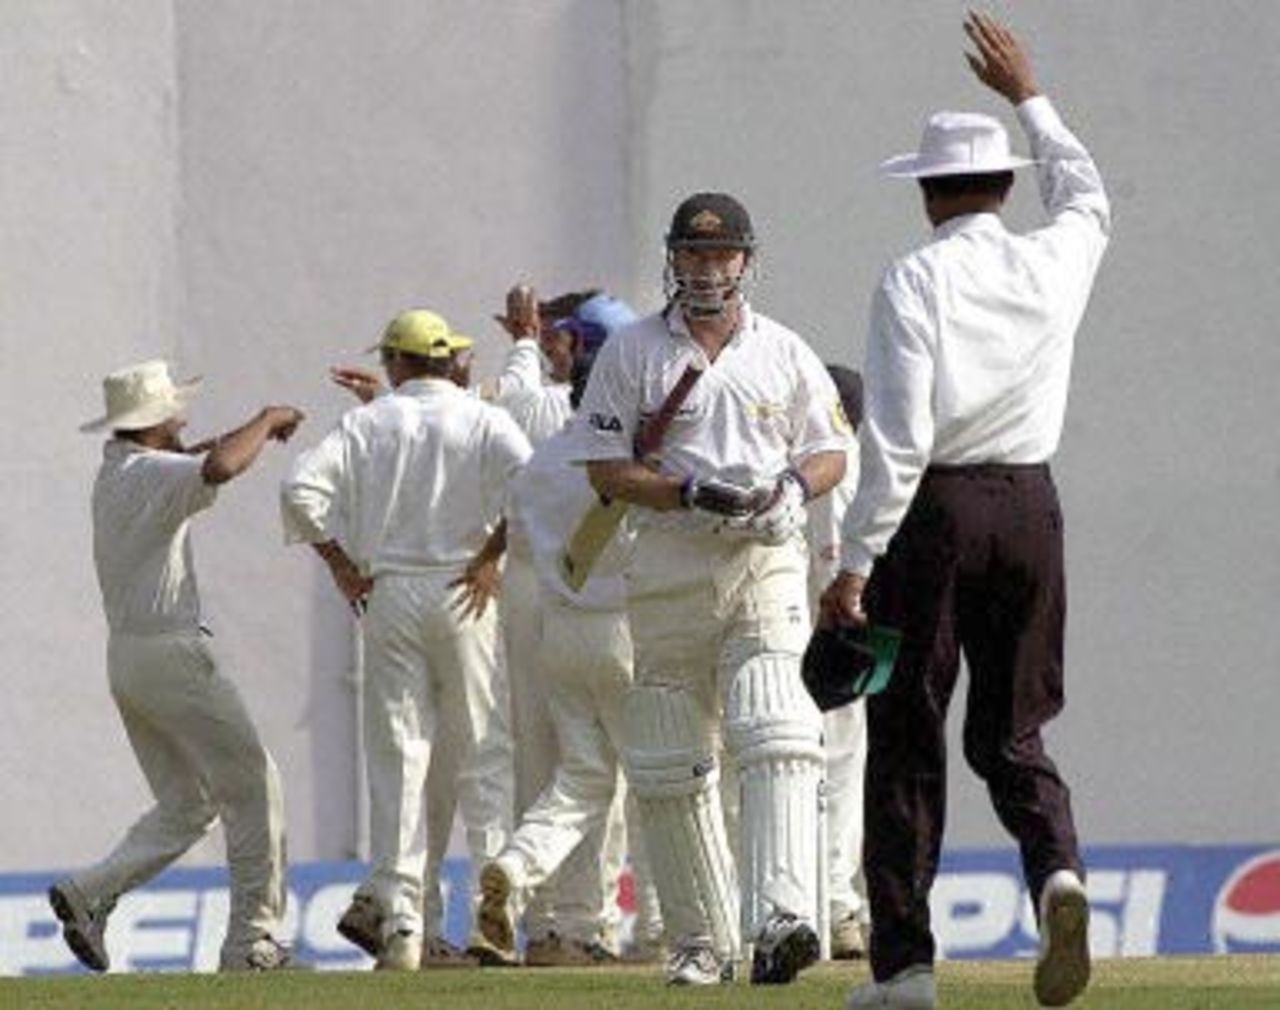 Indian players celebrate (background) the dismissal of Australian skipper Steve Waugh (w/bat) as he returns to the pavillion on the first day of the first three-day test match in Nagpur, 17 February 2001. Australia were 116 for 4 after two hours of play.